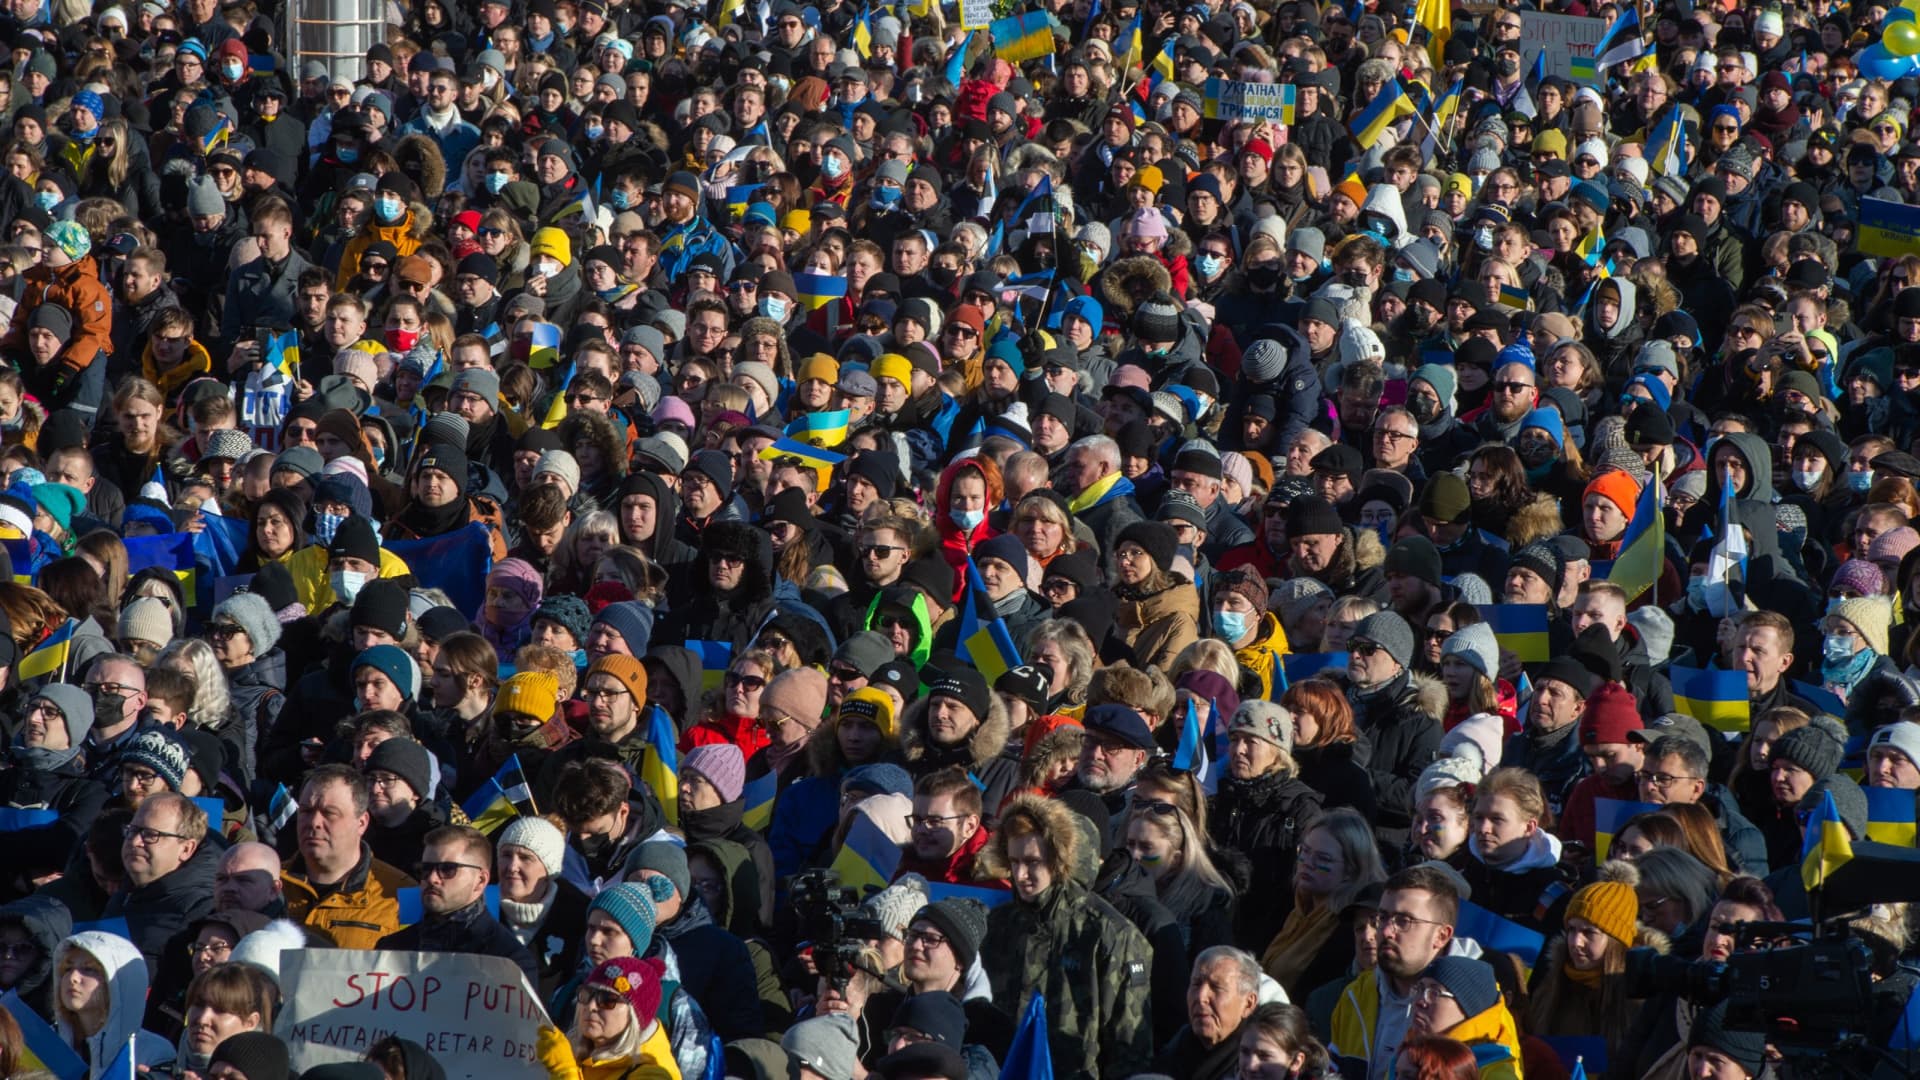 Protesters take part in a demonstration in support of Ukraine on Freedom Square in Tallinn, Estonia, on February 26, 2022, following Russia's invasion of Ukraine.